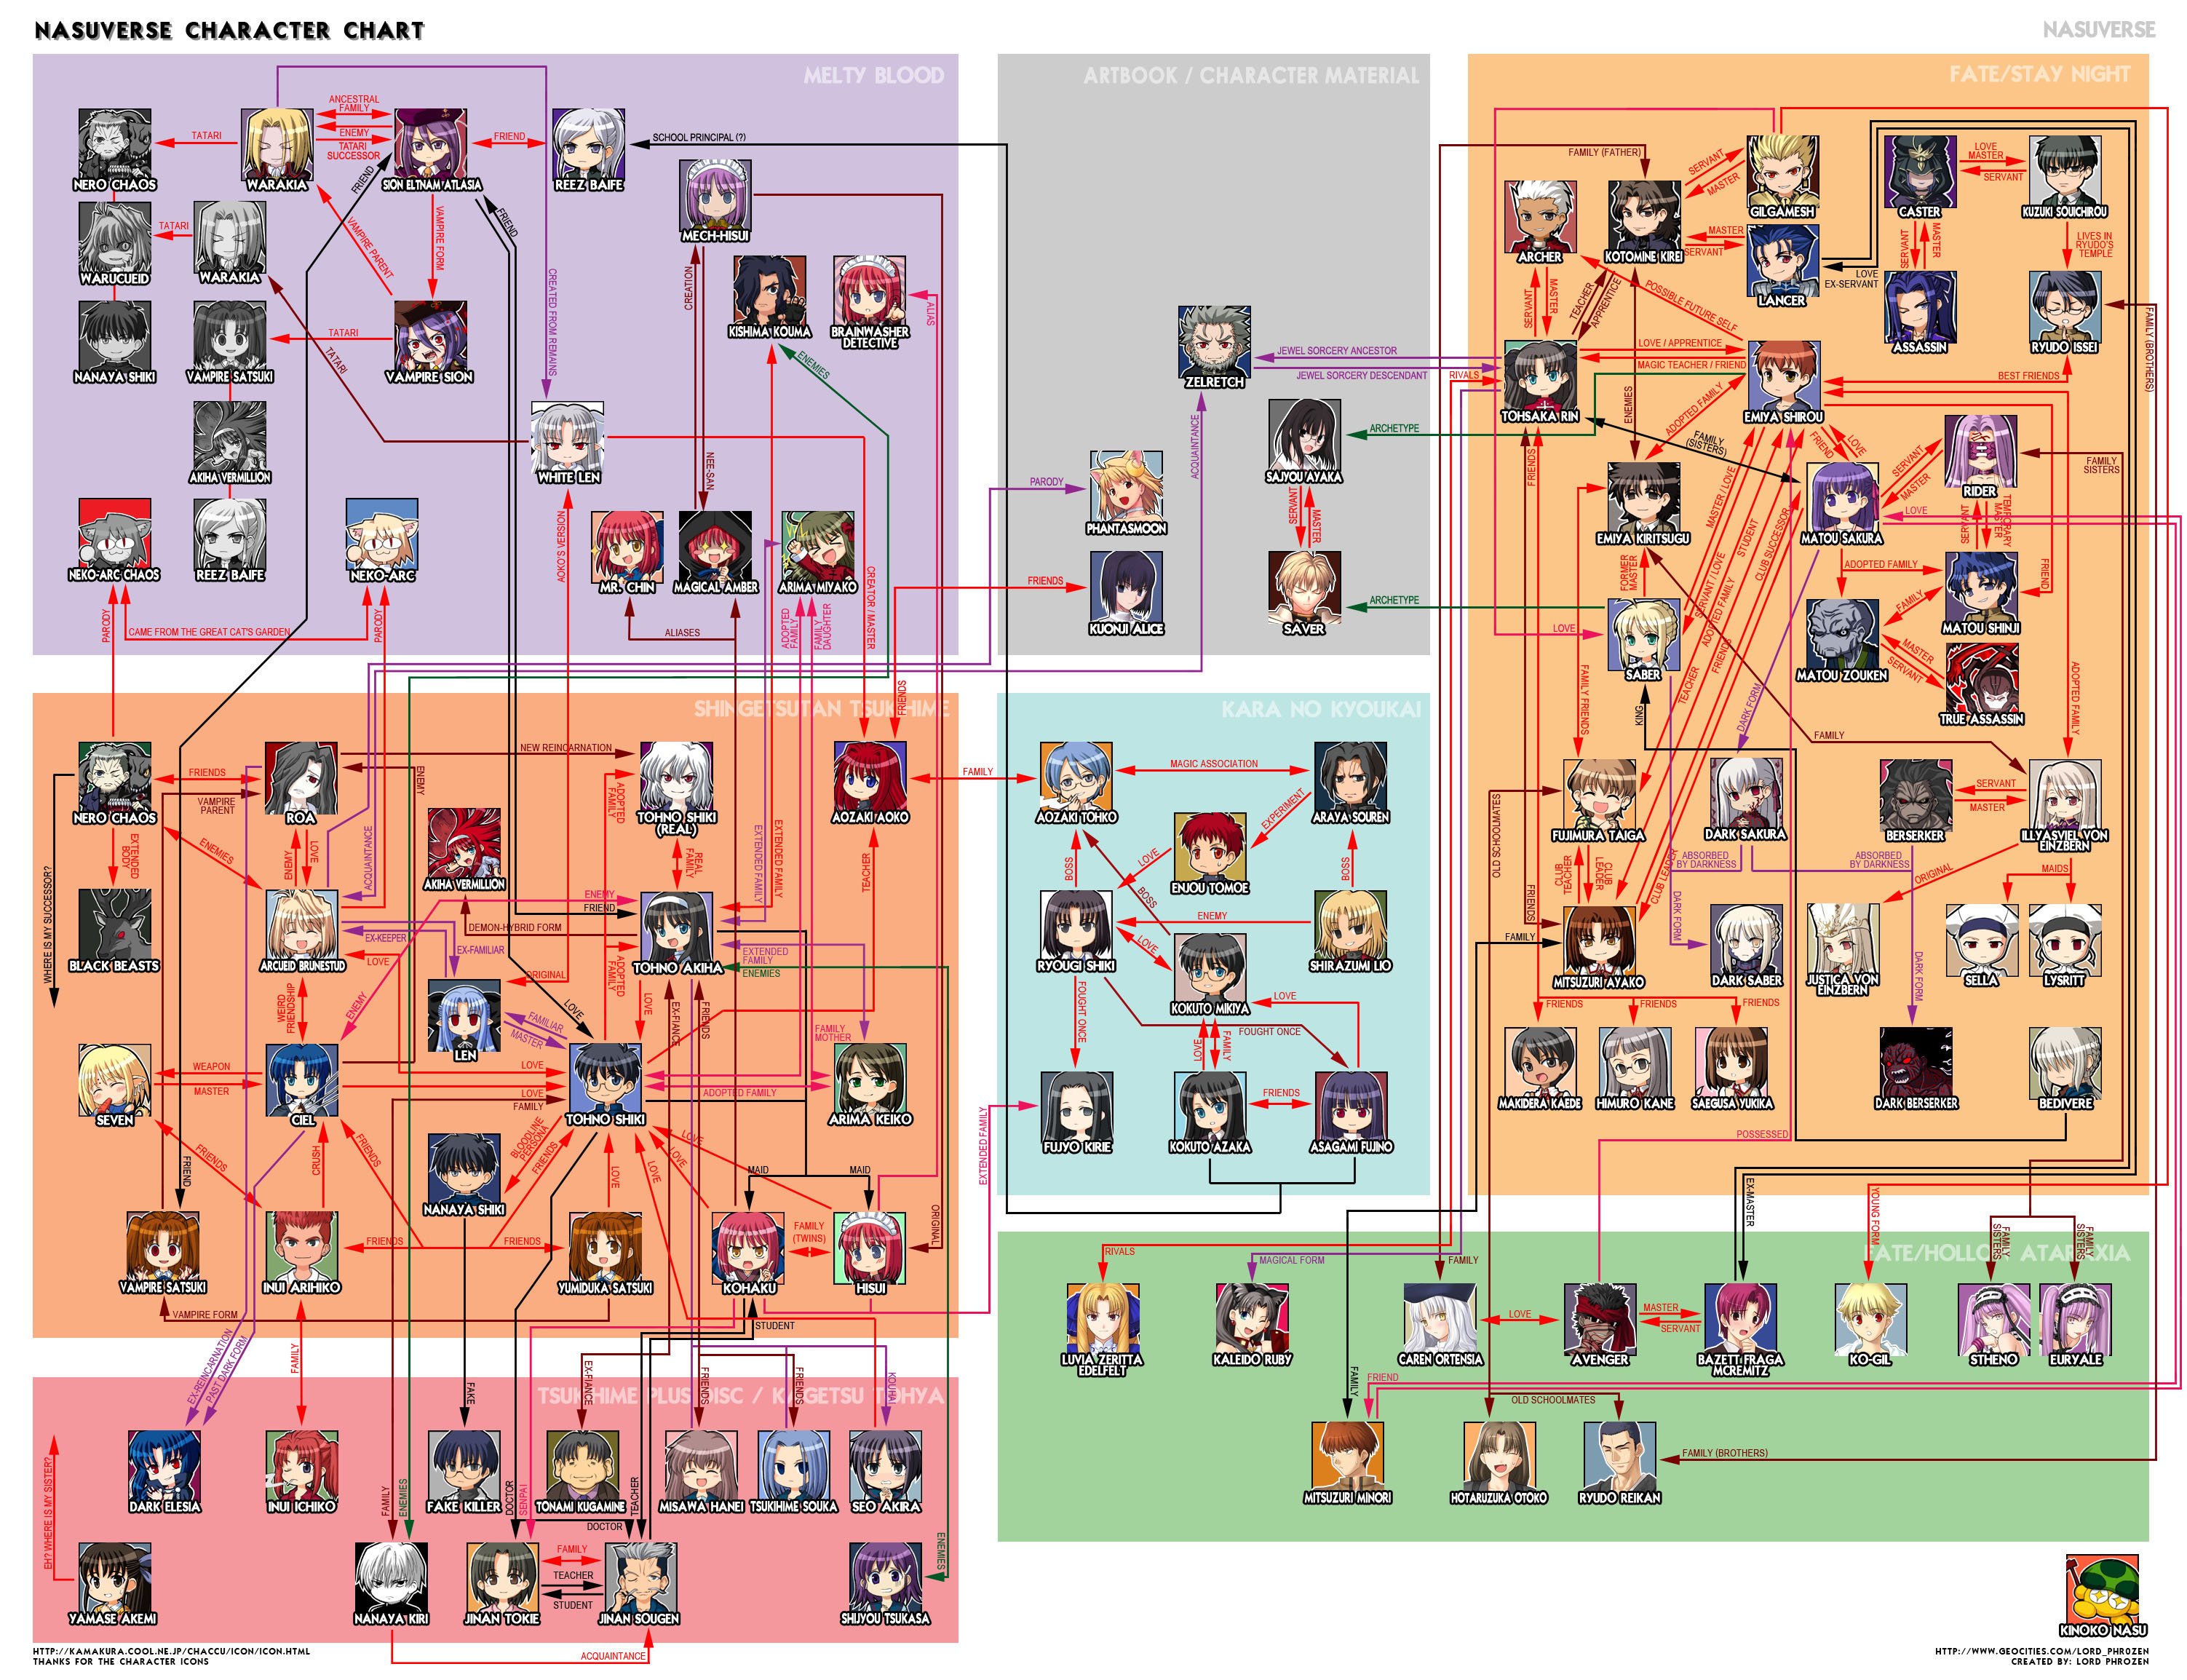 Connections and characters